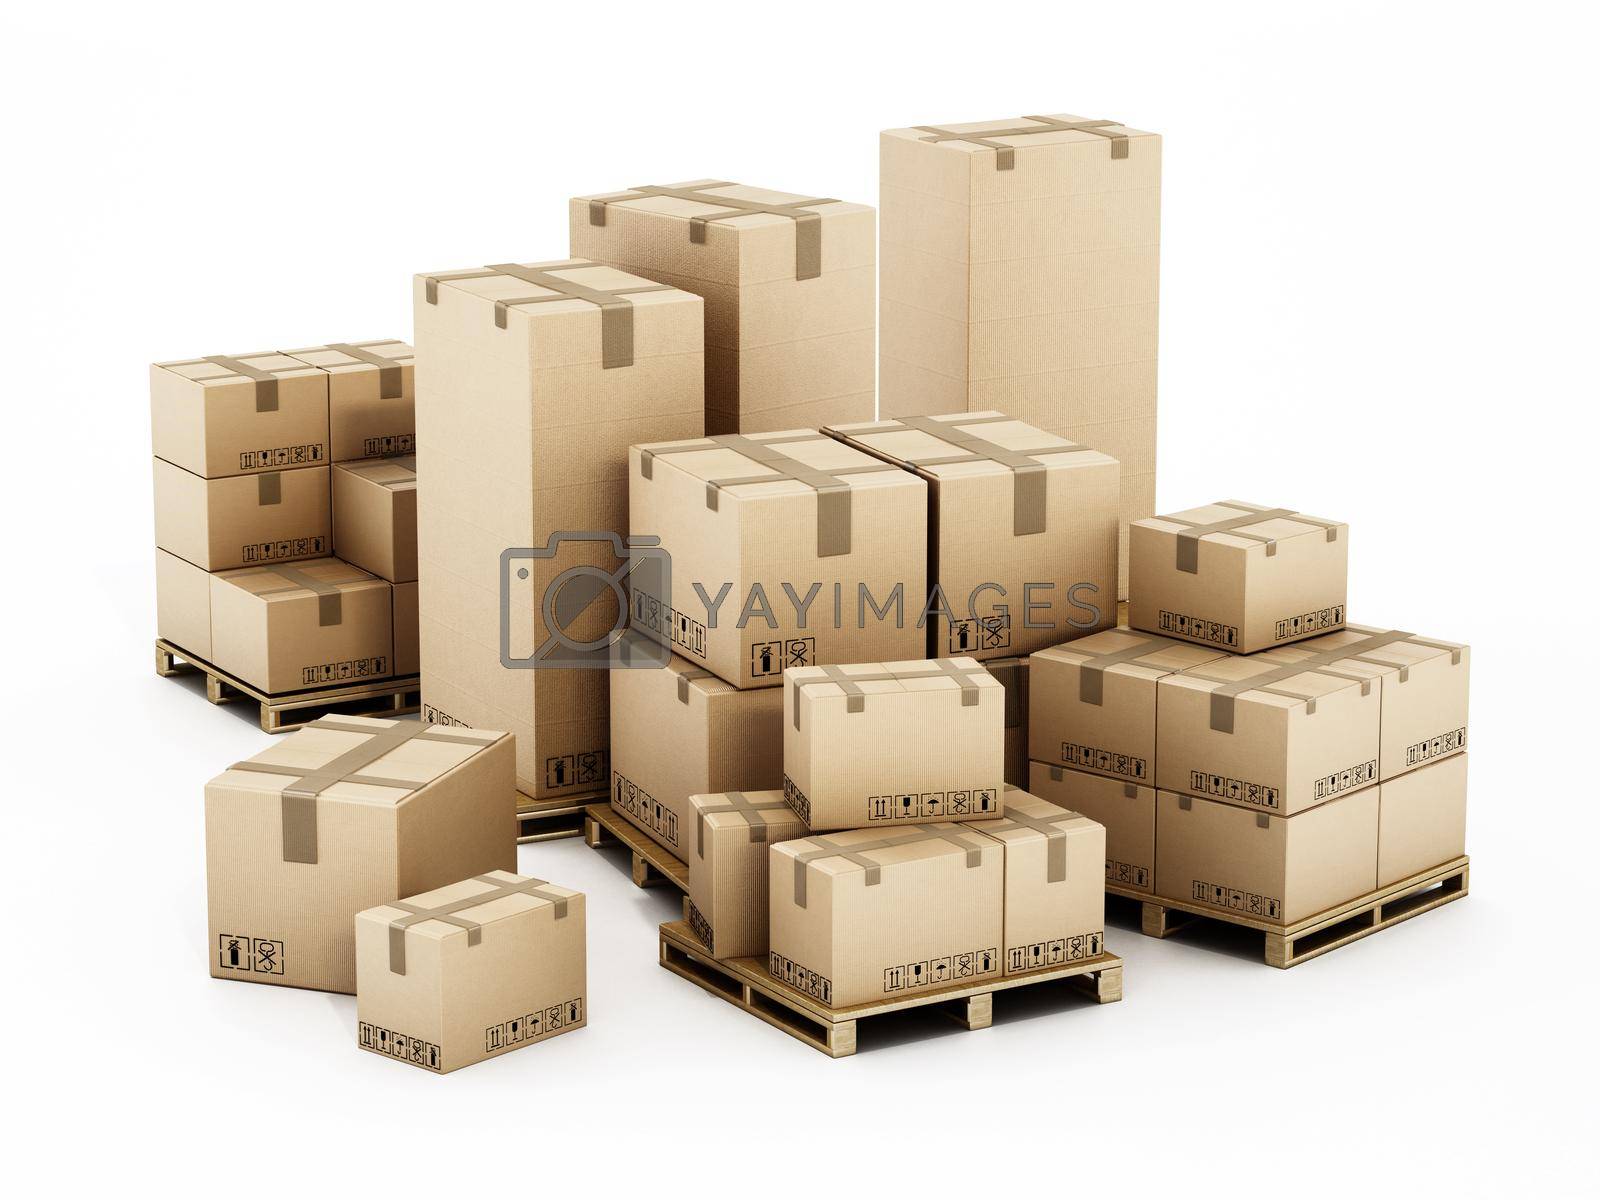 Royalty free image of Stack of cardboard boxes isolated on white background. 3D illustration by Simsek